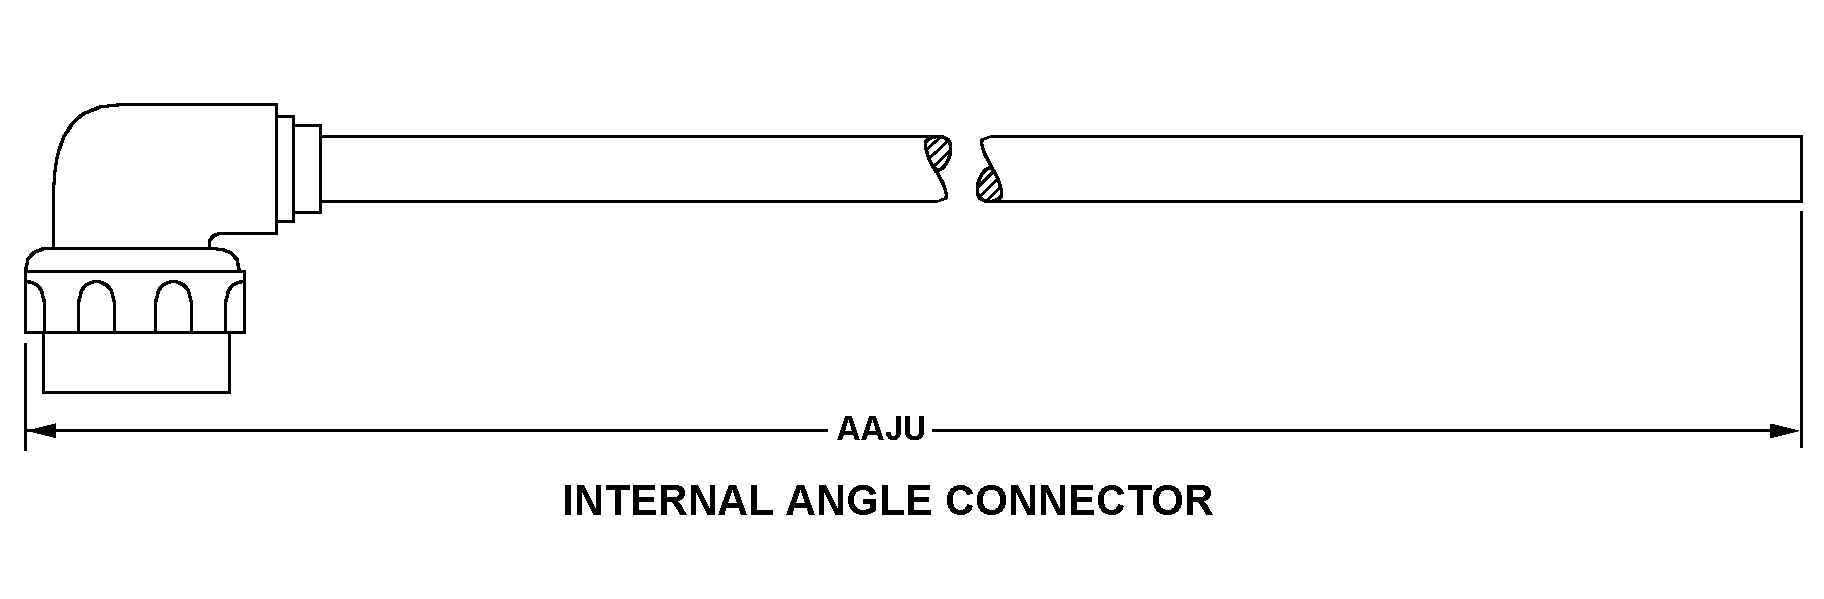 INTERNAL ANGLE CONNECTOR style nsn 5995-01-213-2902